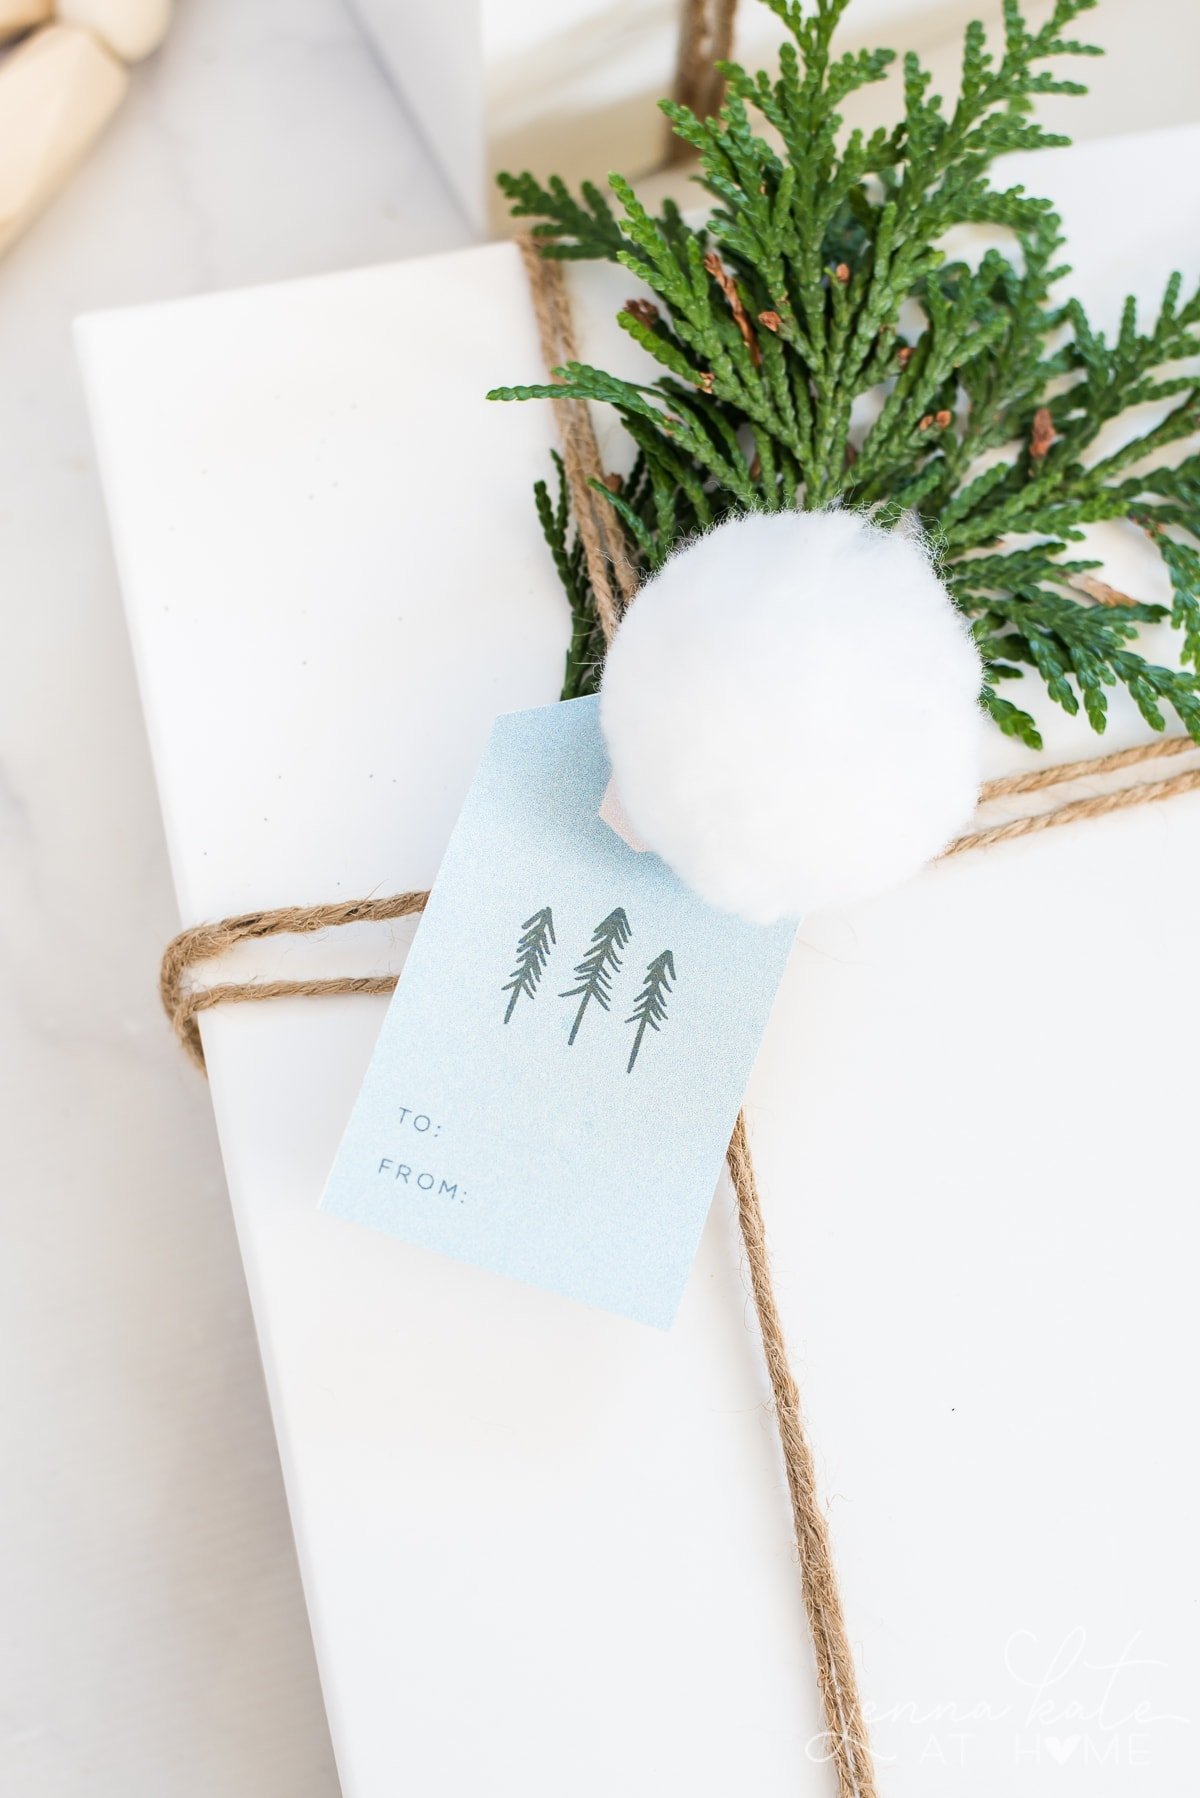 Make your gifts extra special this Christmas with these free printable gift tags